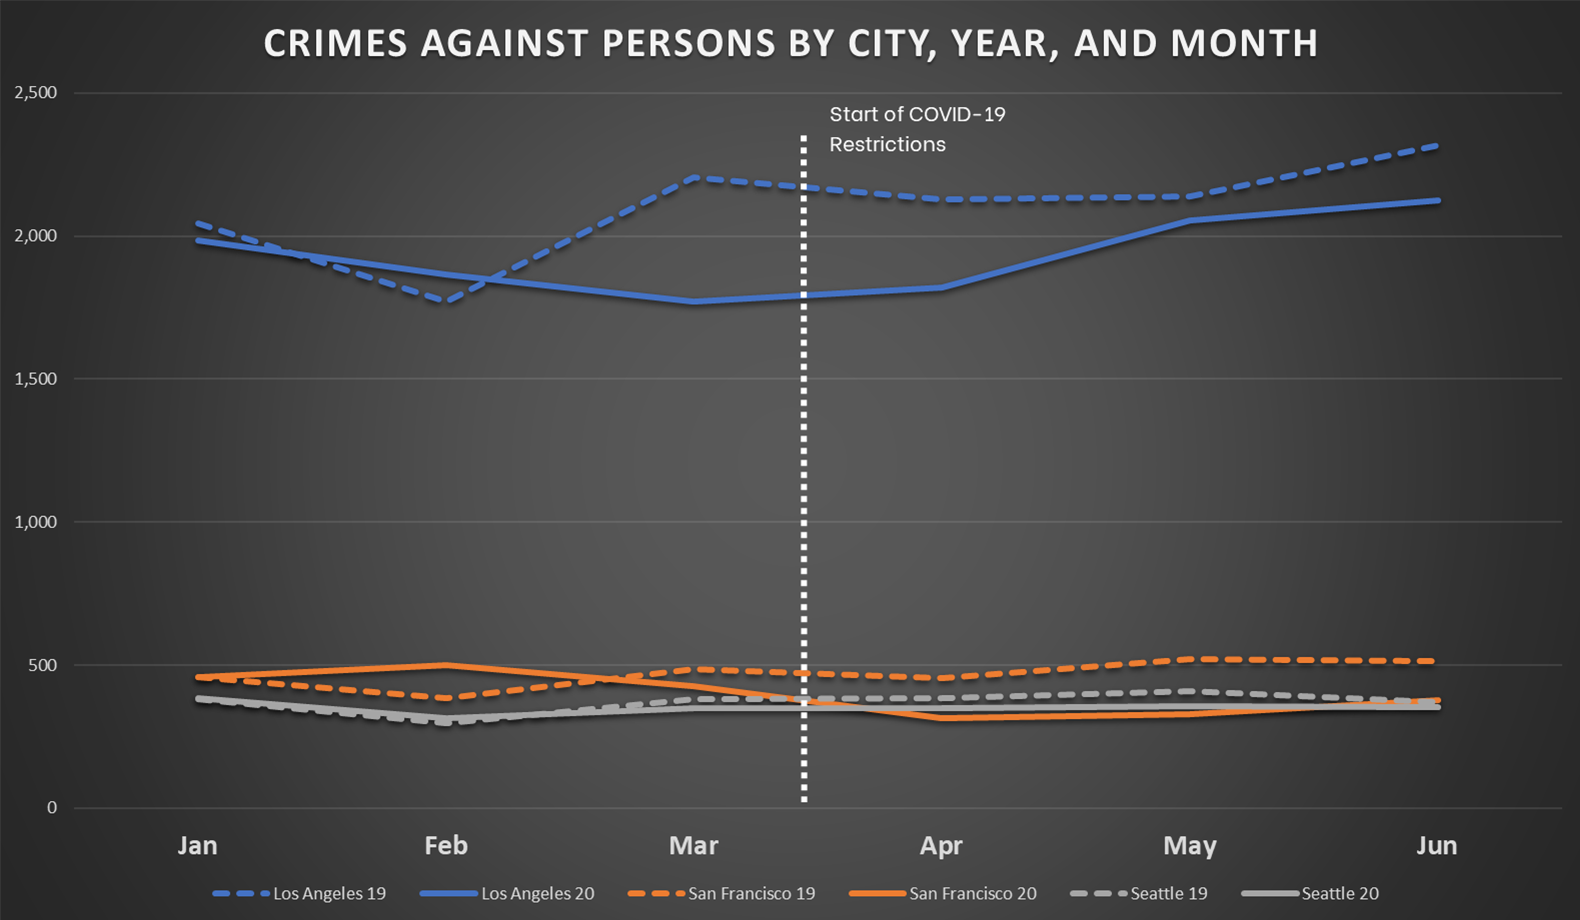 Crimes Against Persons by City, Year, and Month for Western Cities